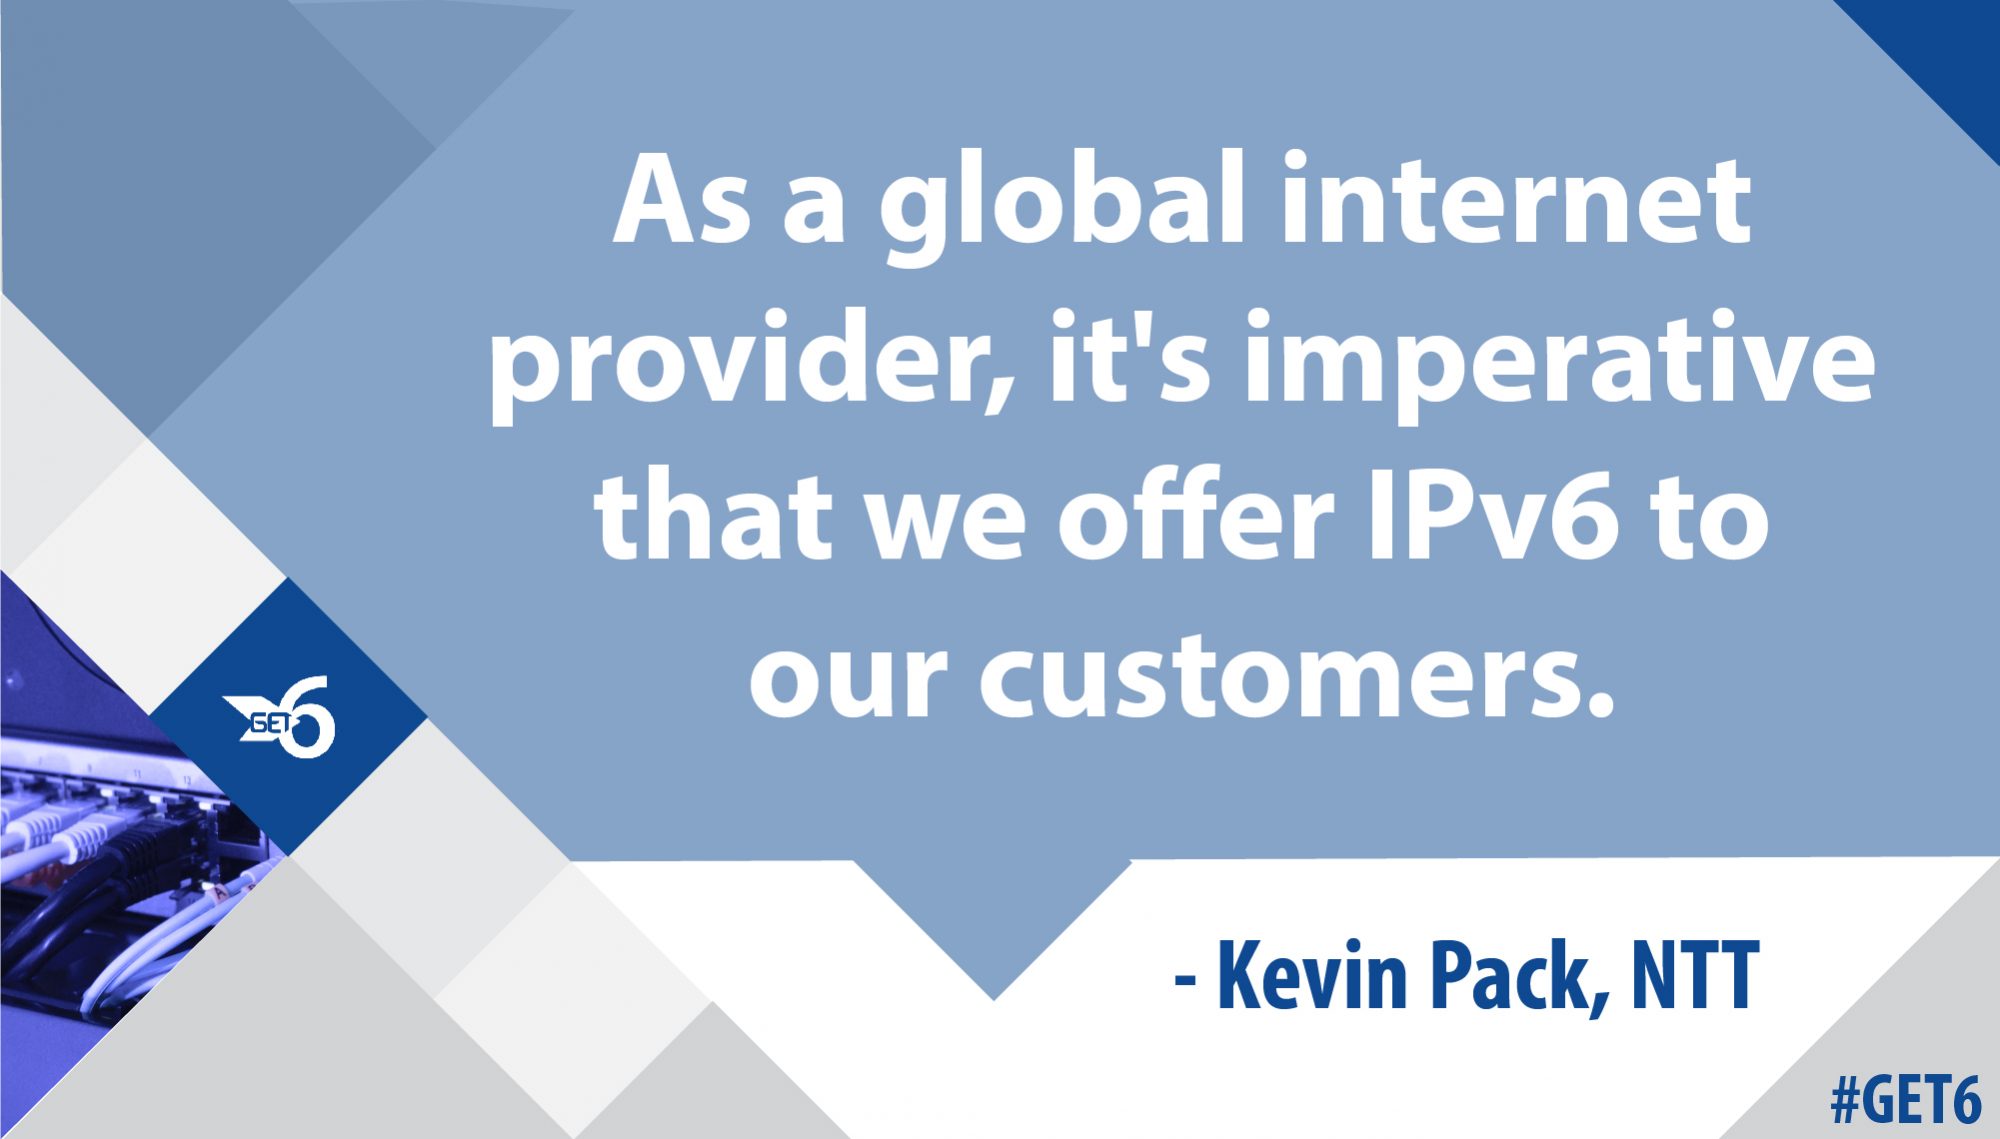 “As a global internet provider, it’s imperative that we offer IPv6 to our customers.”